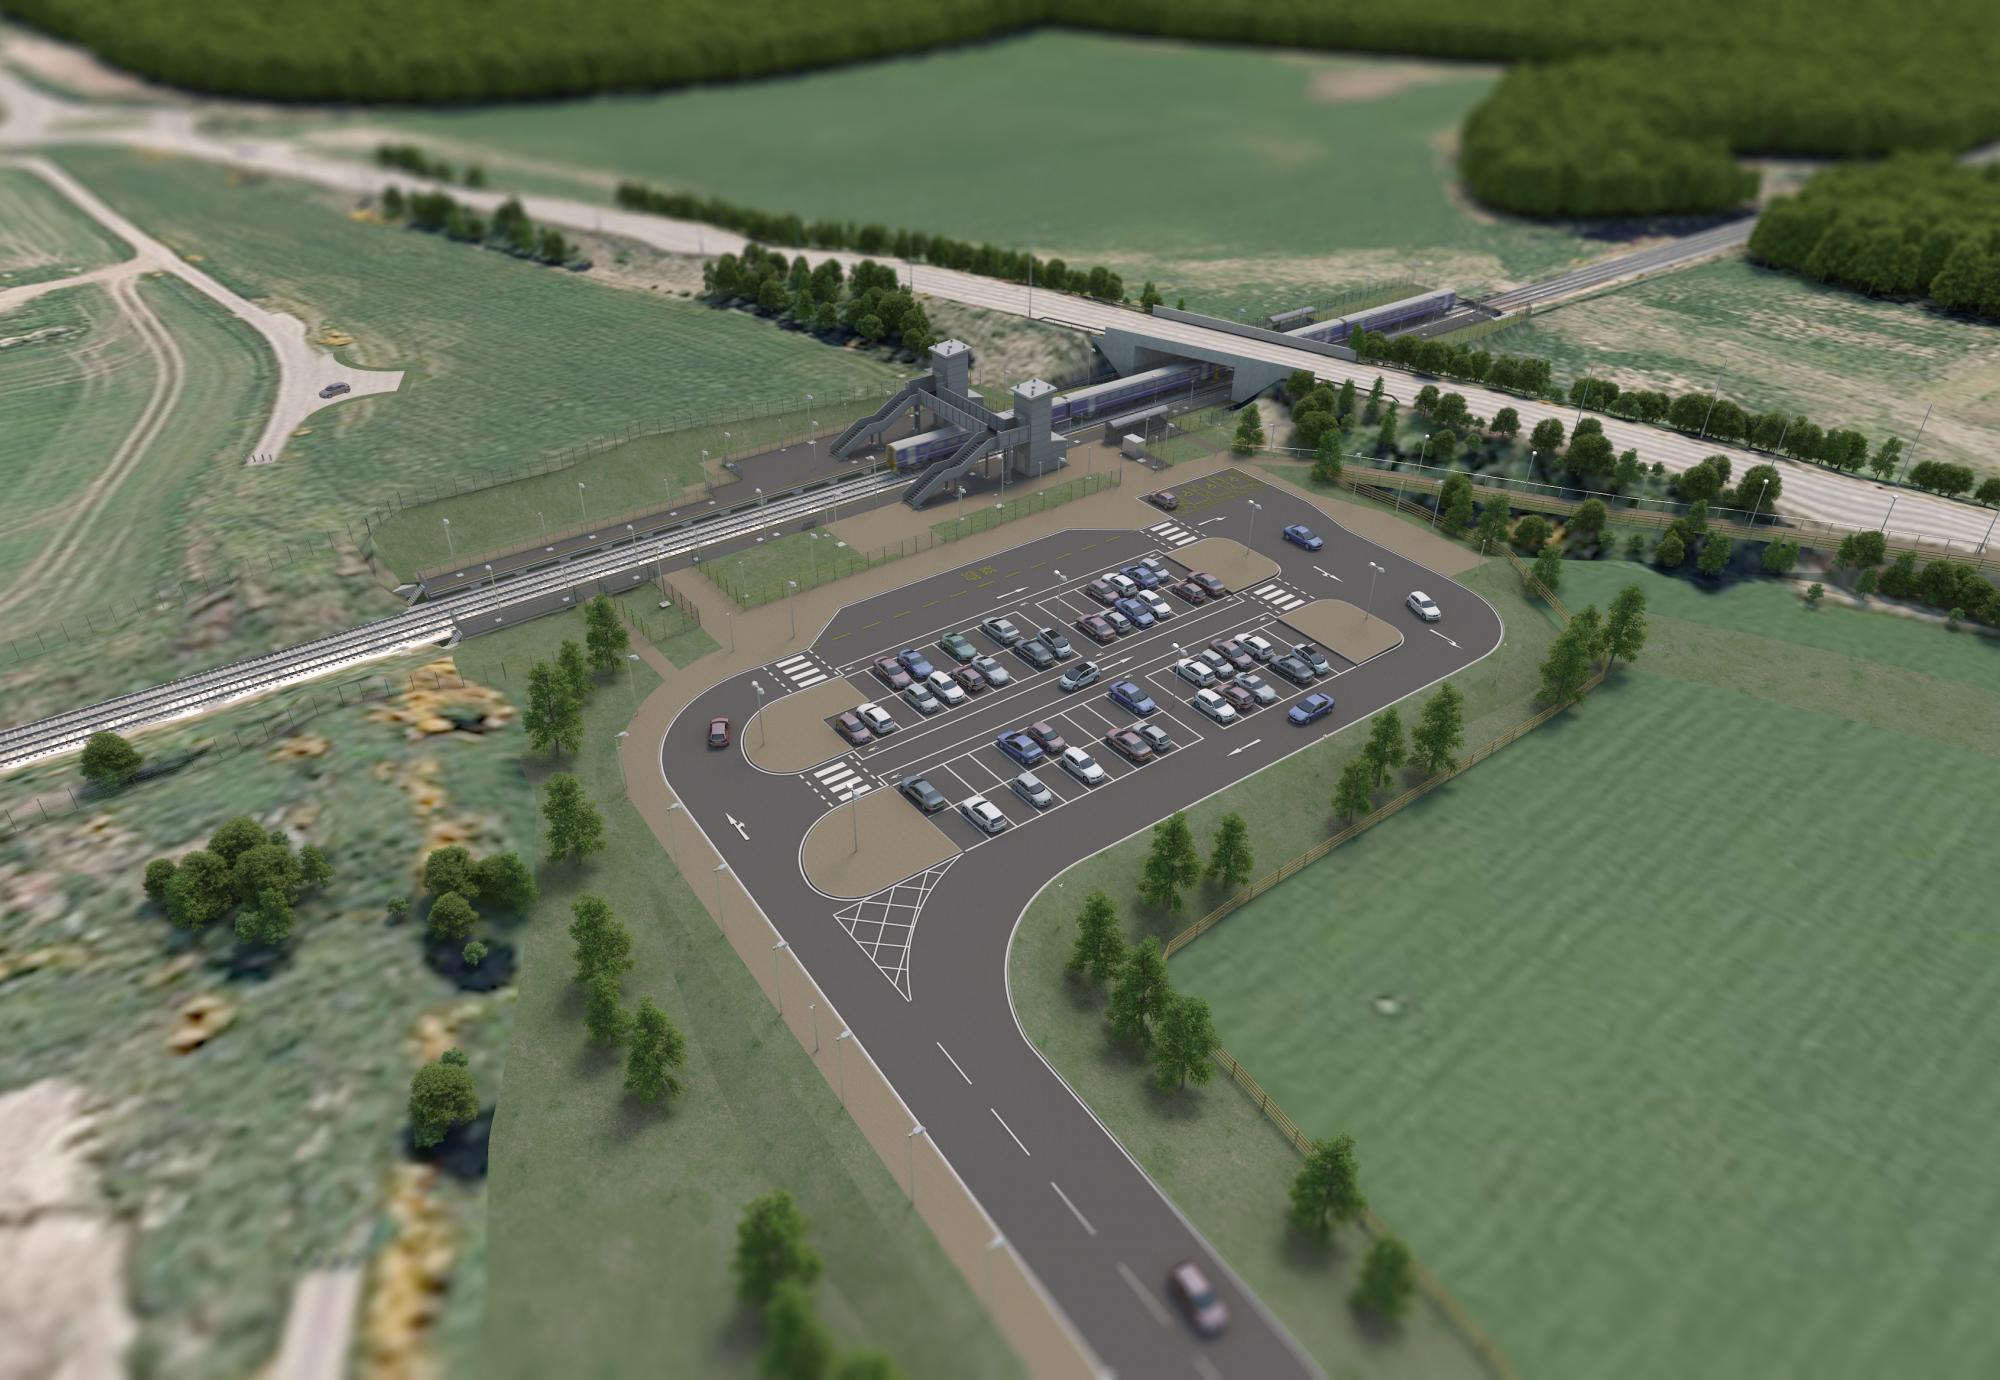 Plans for the new Inverness Airport station